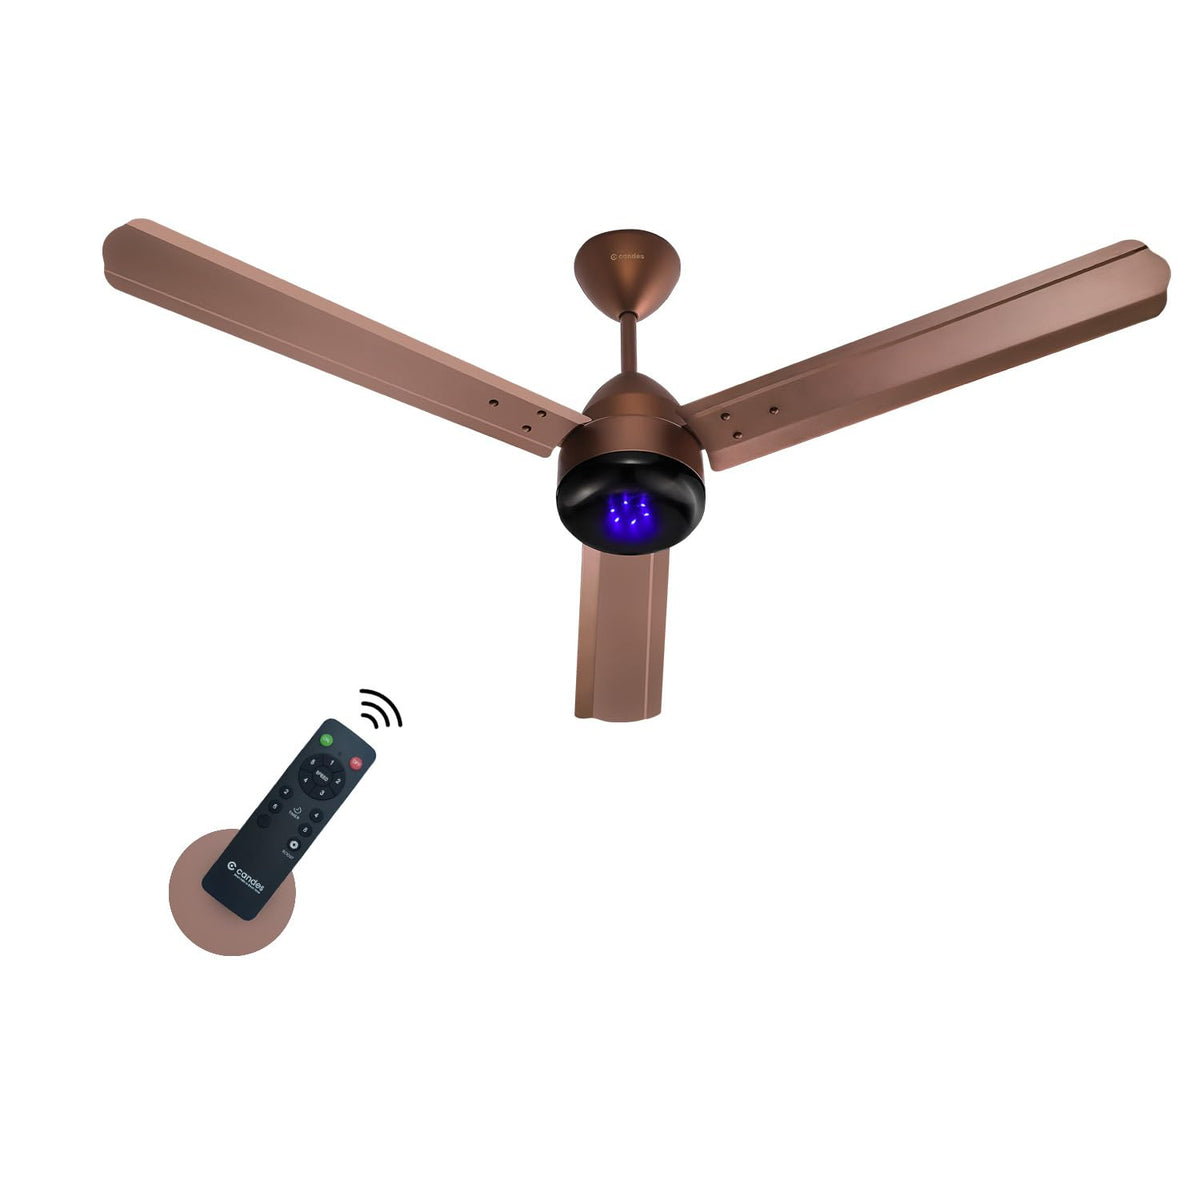 Candes Majestic Bldc Led Ceiling Fan 1200Mm / 48 Inch | Bee 5 stars Rated, Upto 65% Energy Saving, High Air Delivery & High Speed Ceiling Fans For Home | 2+1 Years Warranty | Rusty Brown